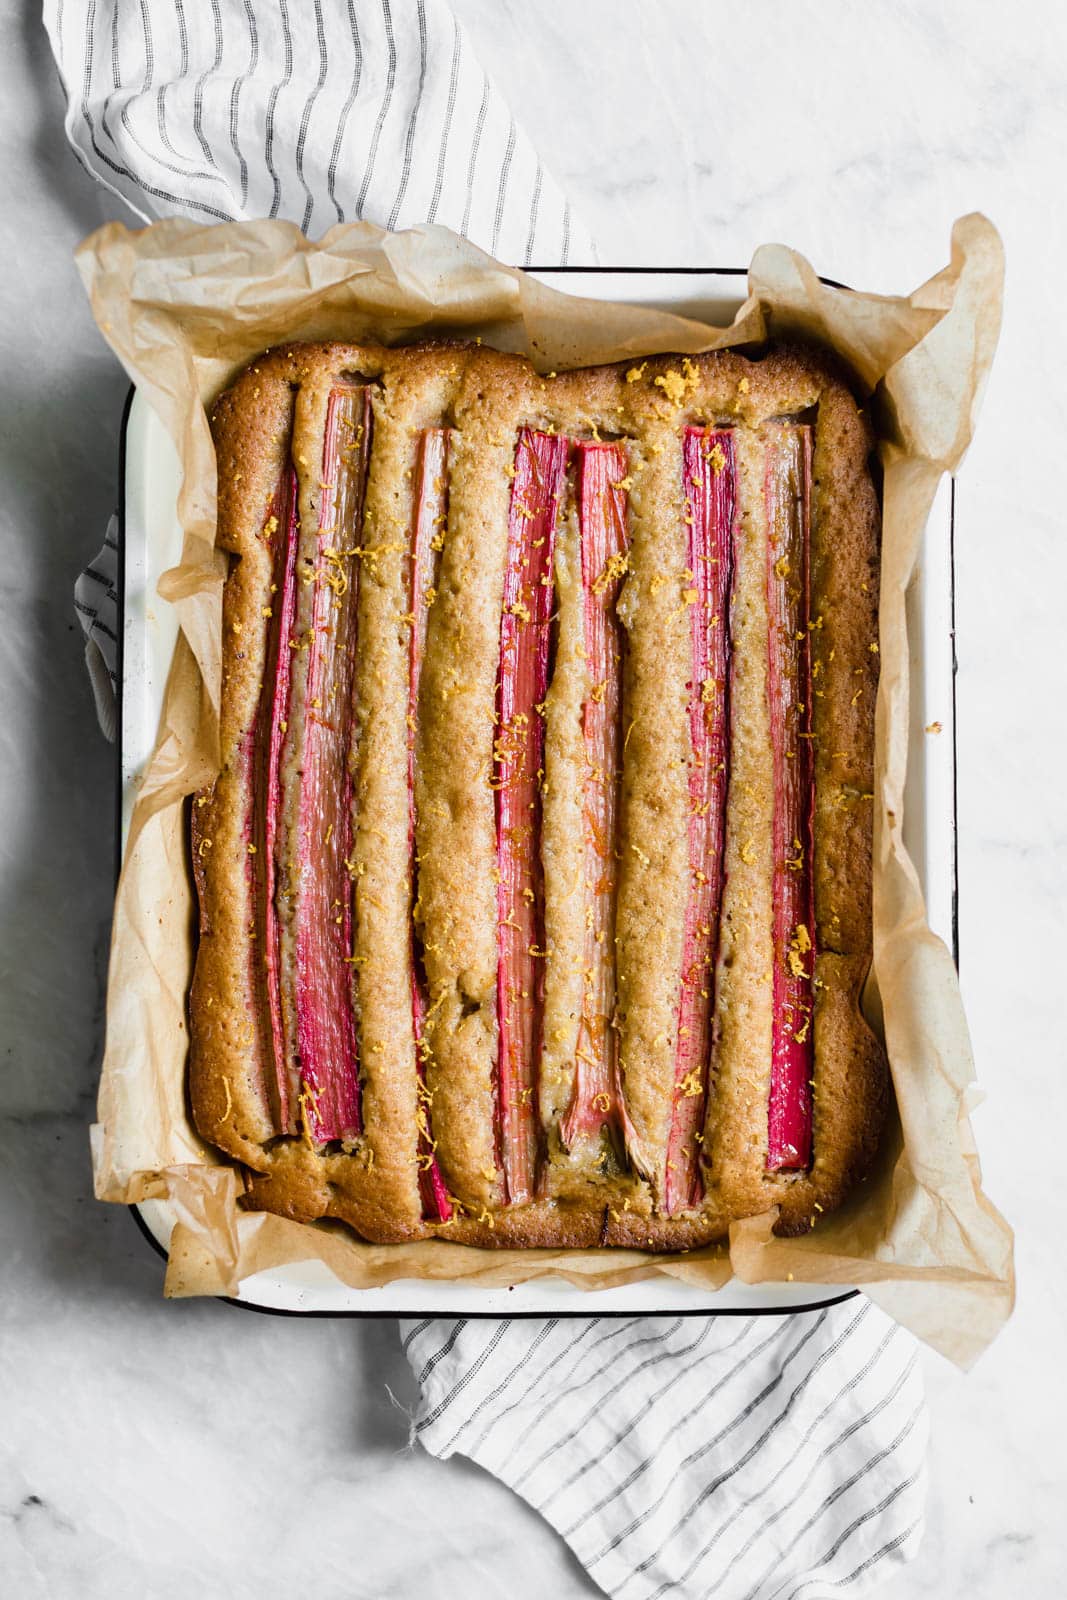 A rustic rhubarb almond honey cake with a hint of orange zest and wildflower honey. A perfect one-bowl snack cake ready in just 45 minutes!